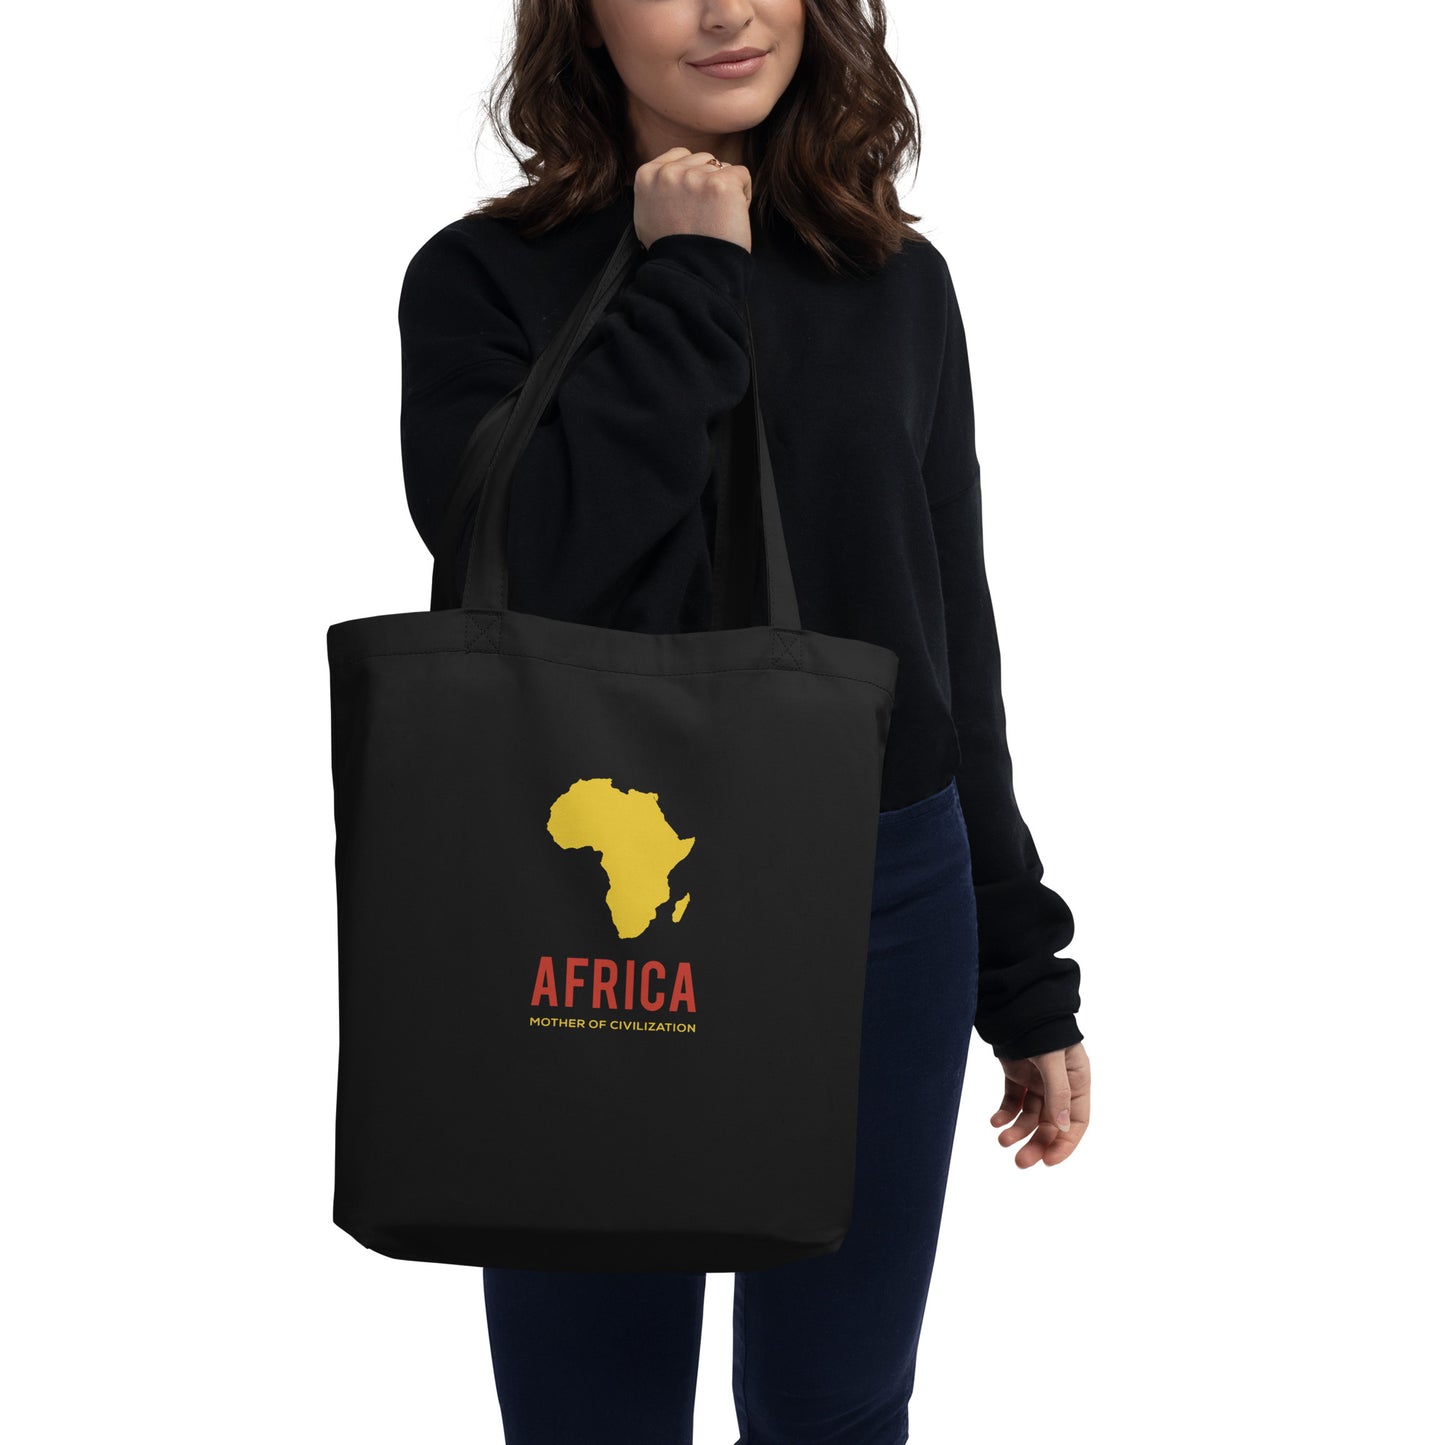 Woman holding a black totebag with yellow Africa shape and "Africa Mother of Civilization" written under in yellow and red text.